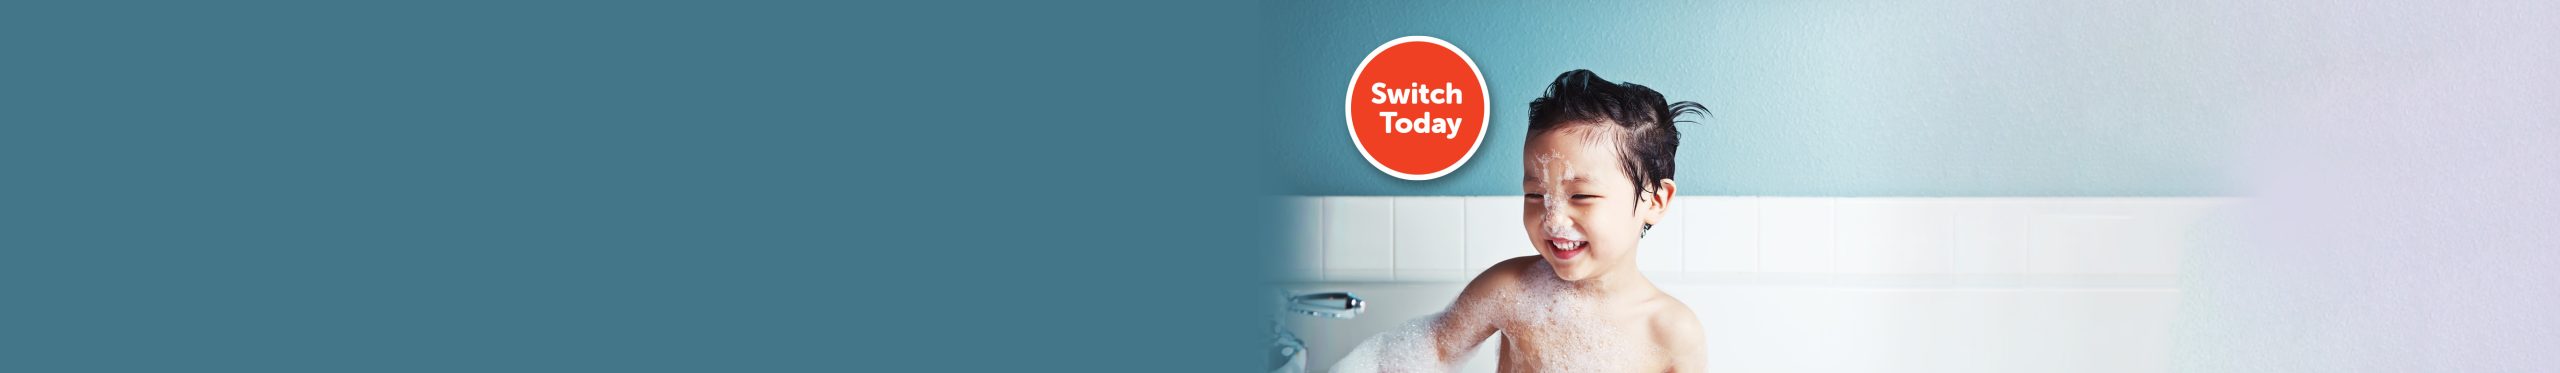 Child in bath tub with bubbles and switch today text